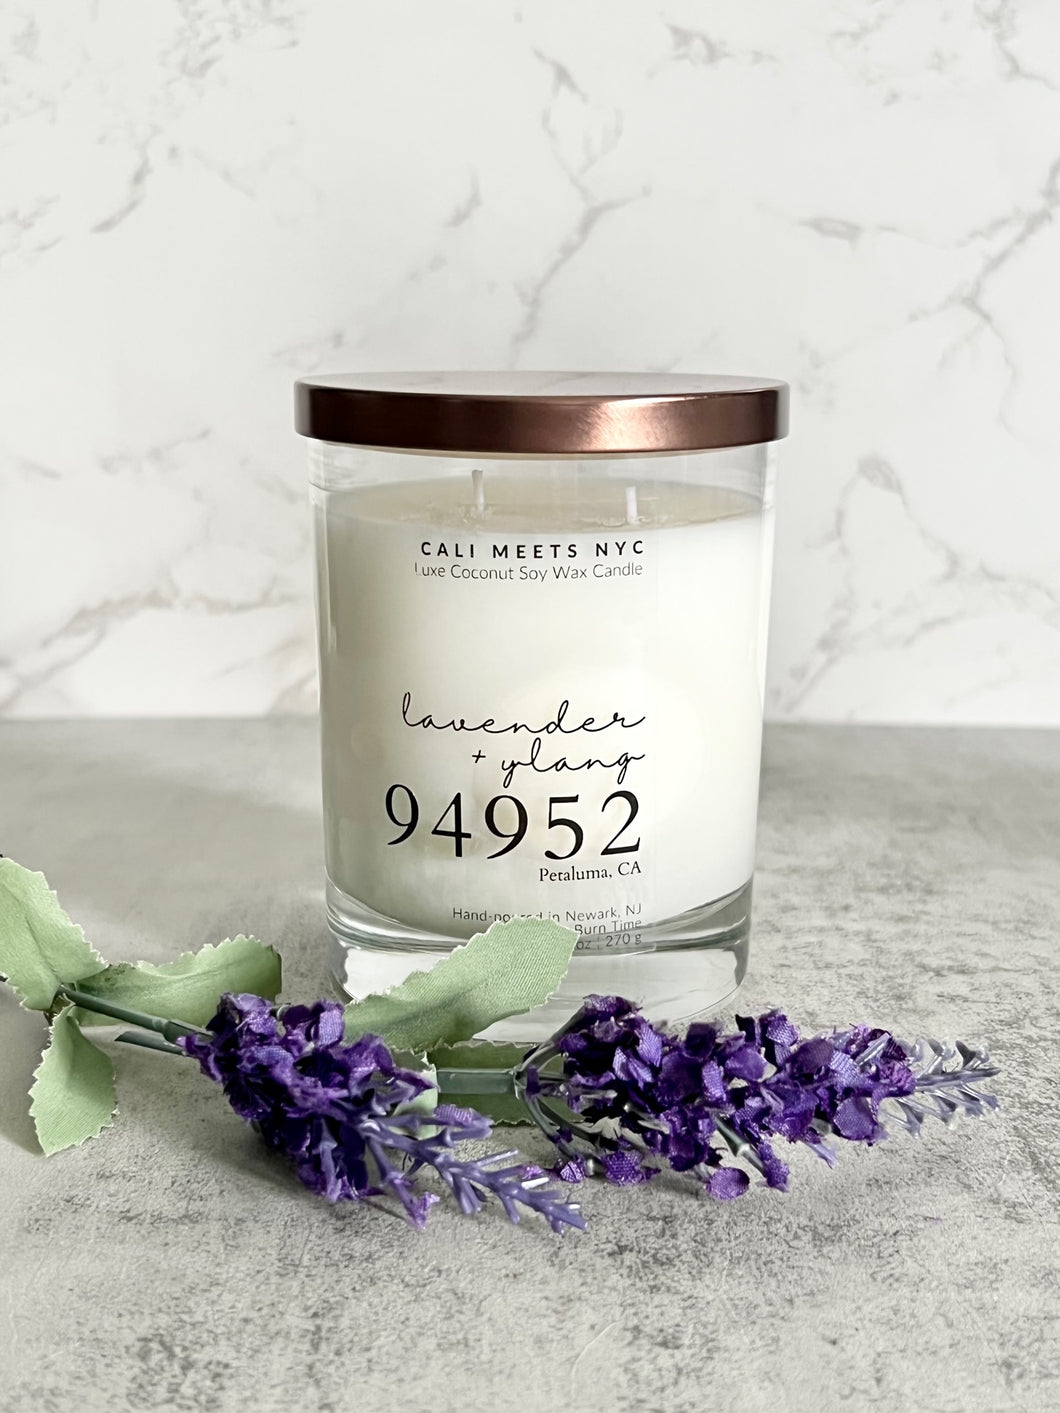 94952, Lavender + Ylang Coconut Soy Candle